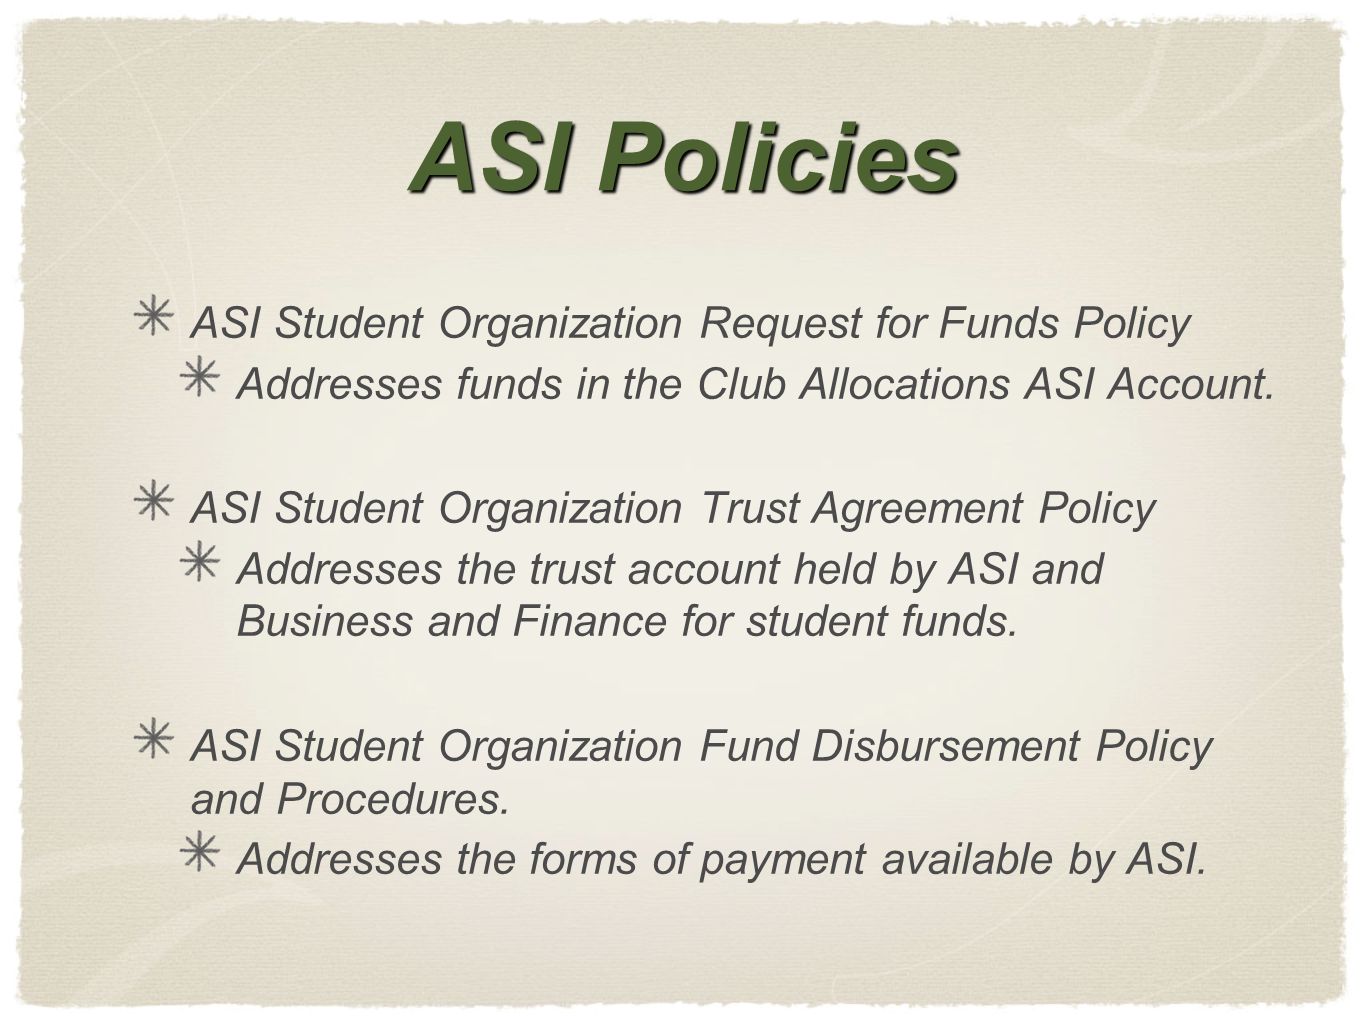 ASI Policies ASI Student Organization Request for Funds Policy Addresses funds in the Club Allocations ASI Account.